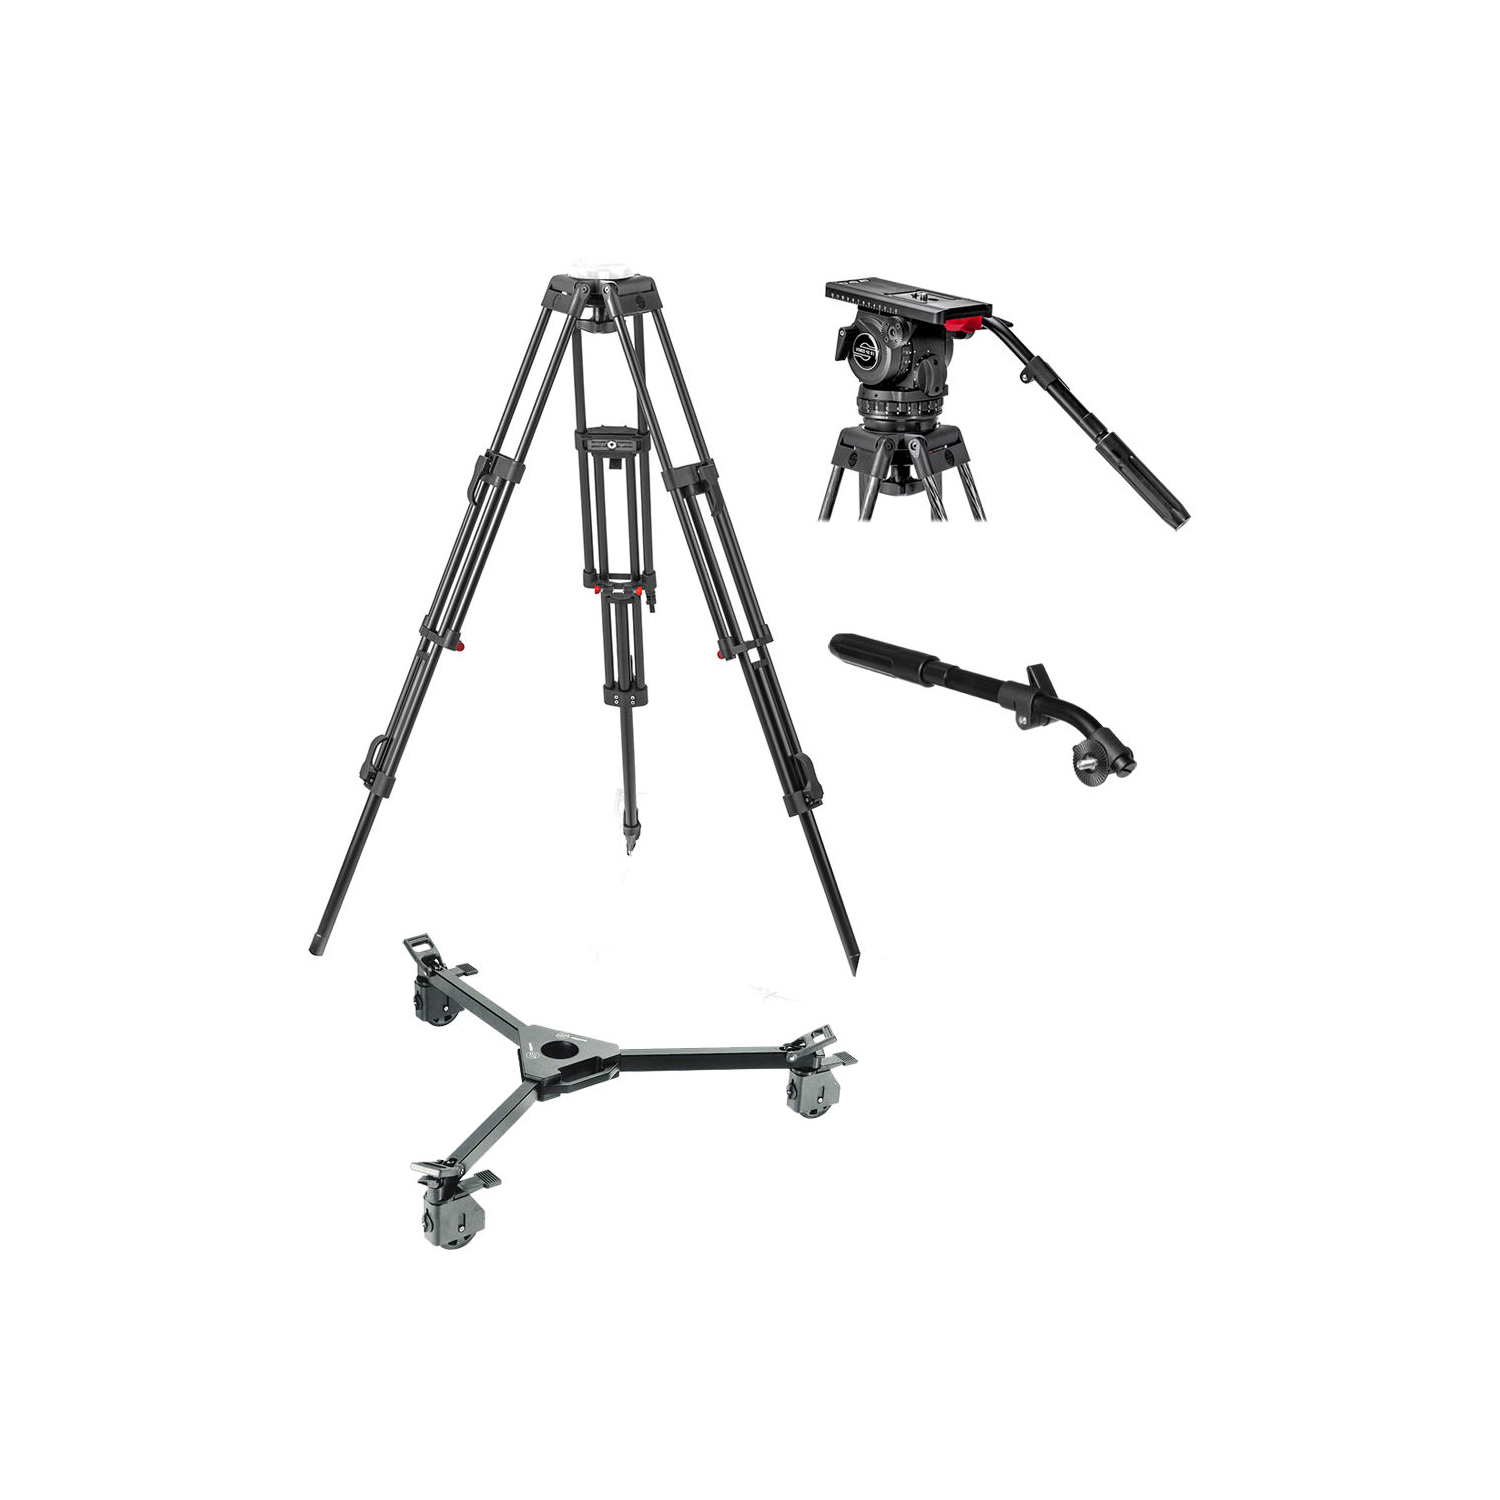 Sachtler Video 18 S2 Head System with ENG 2D Aluminum Tripod, Pan Bar & Dolly S